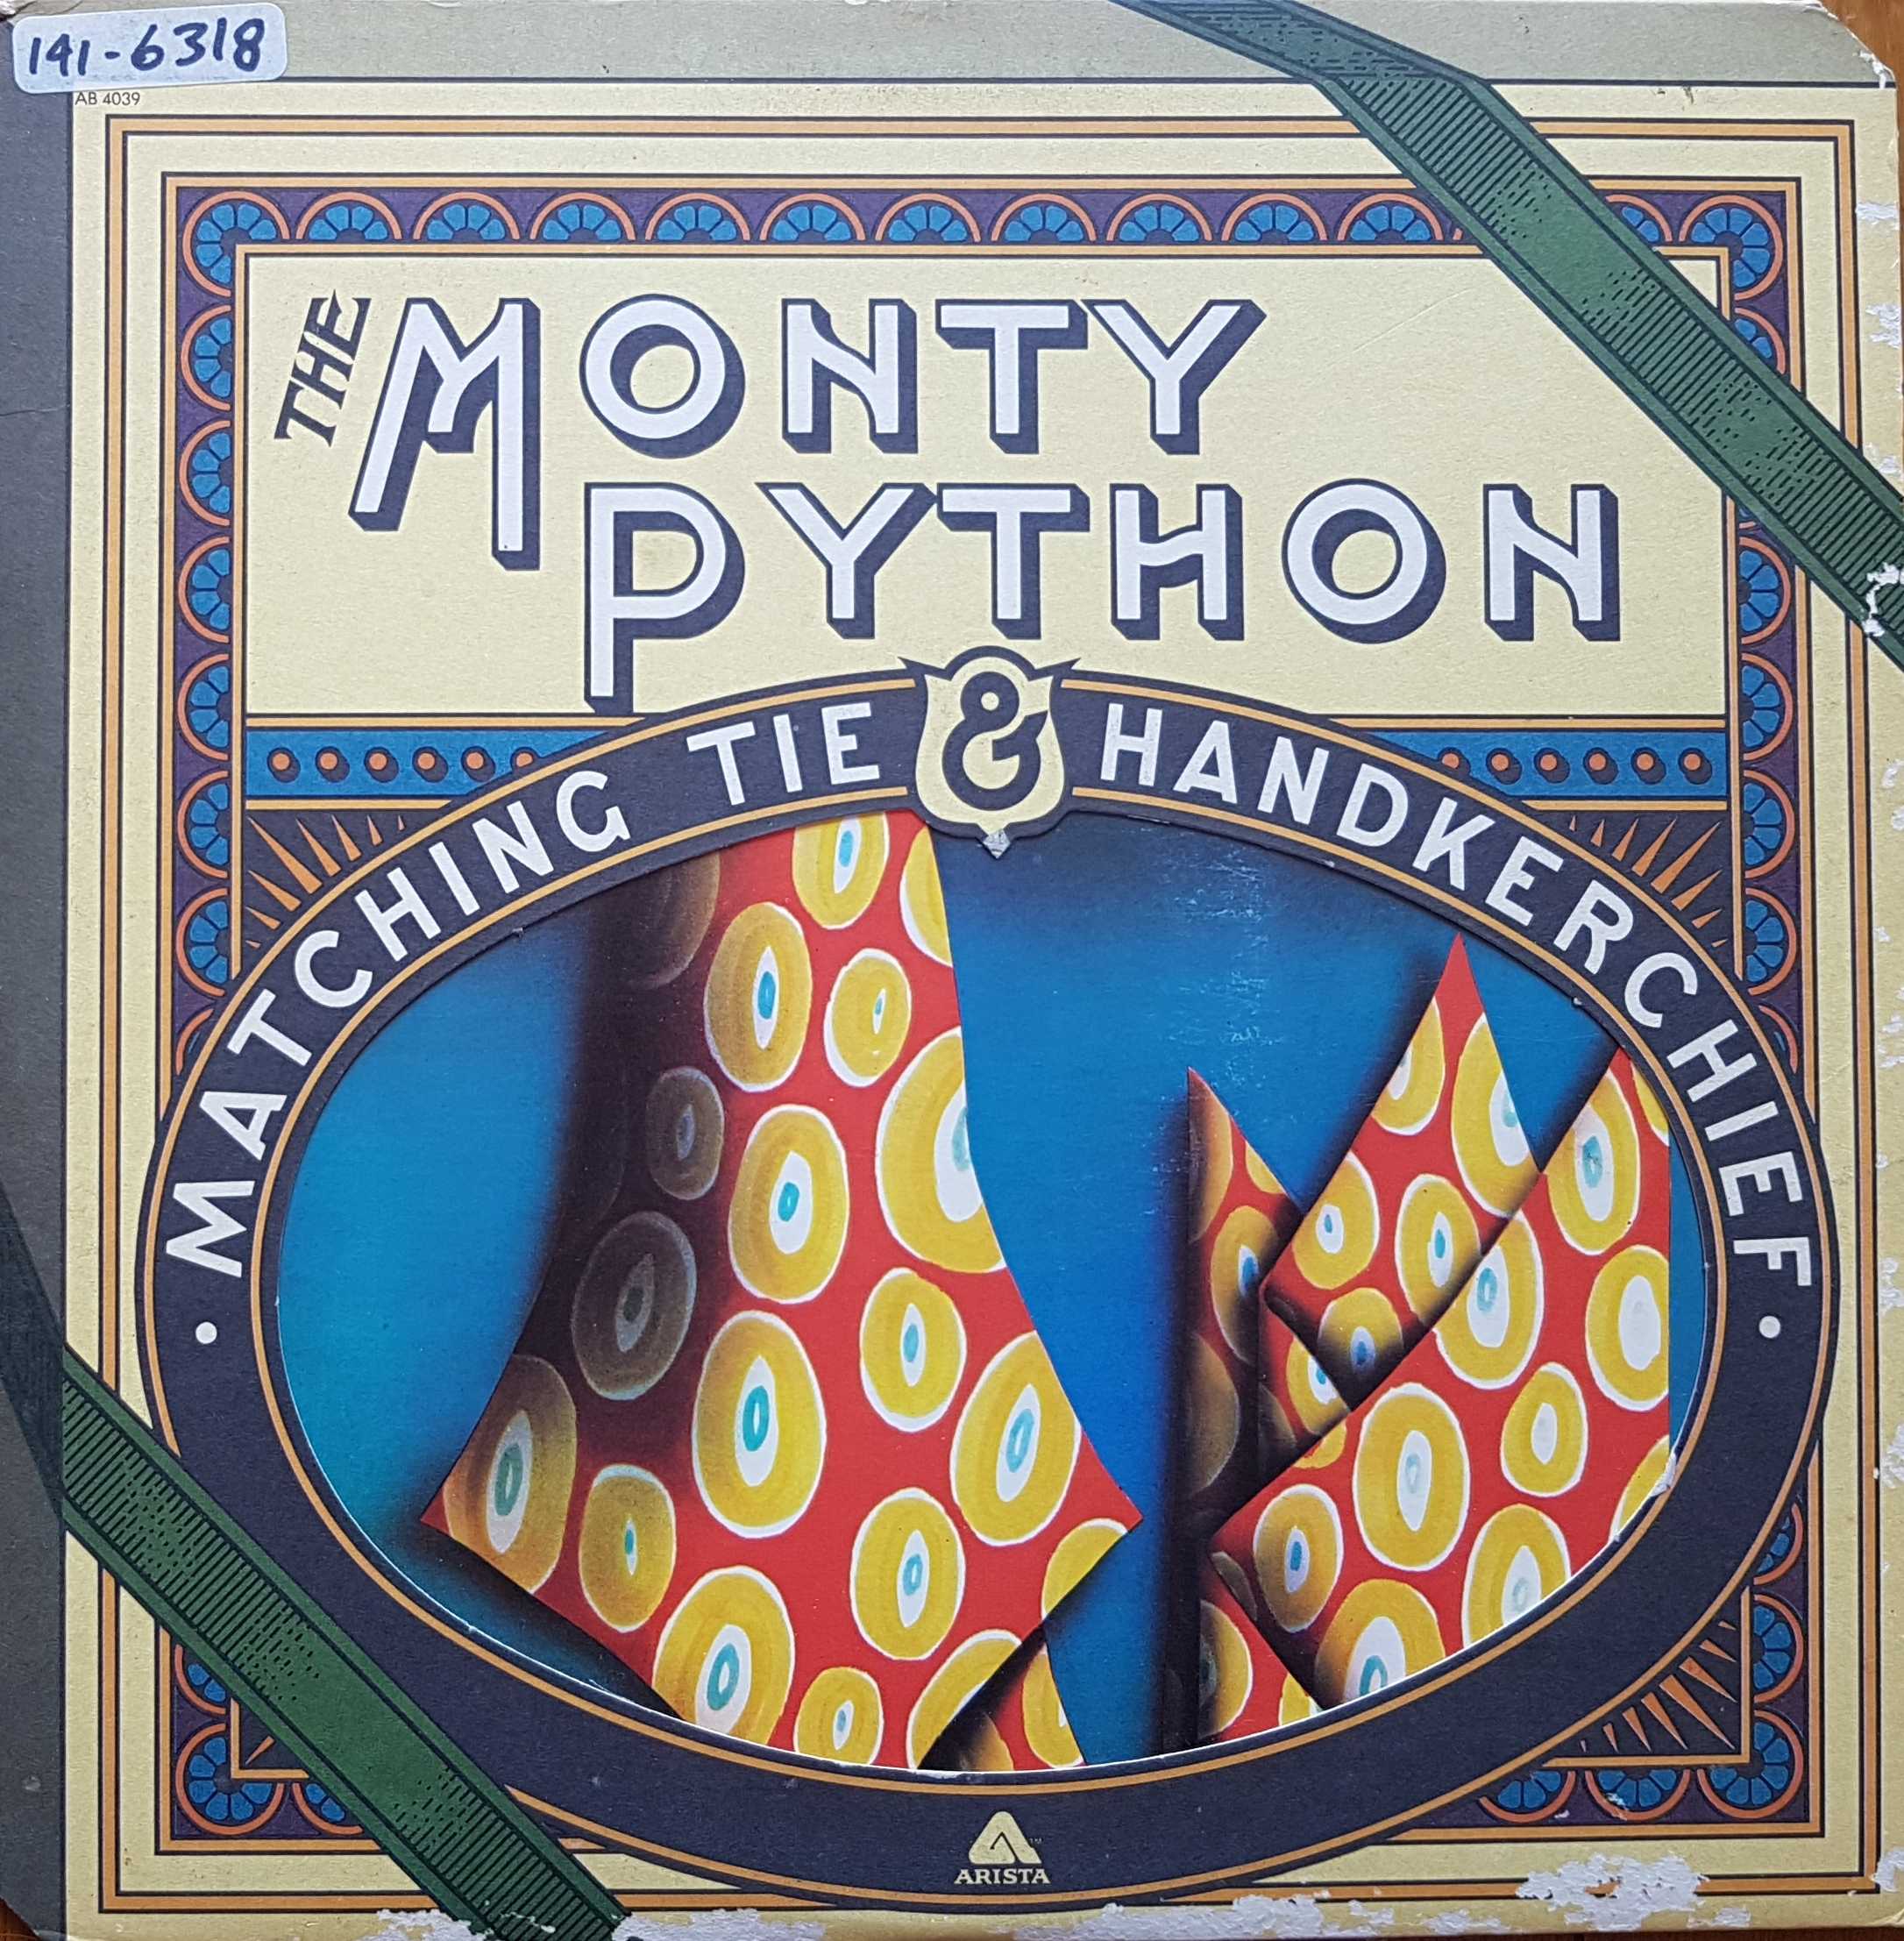 Picture of AB 4039 Matching tie & hankerchief - US import by artist Monty Python from the BBC albums - Records and Tapes library